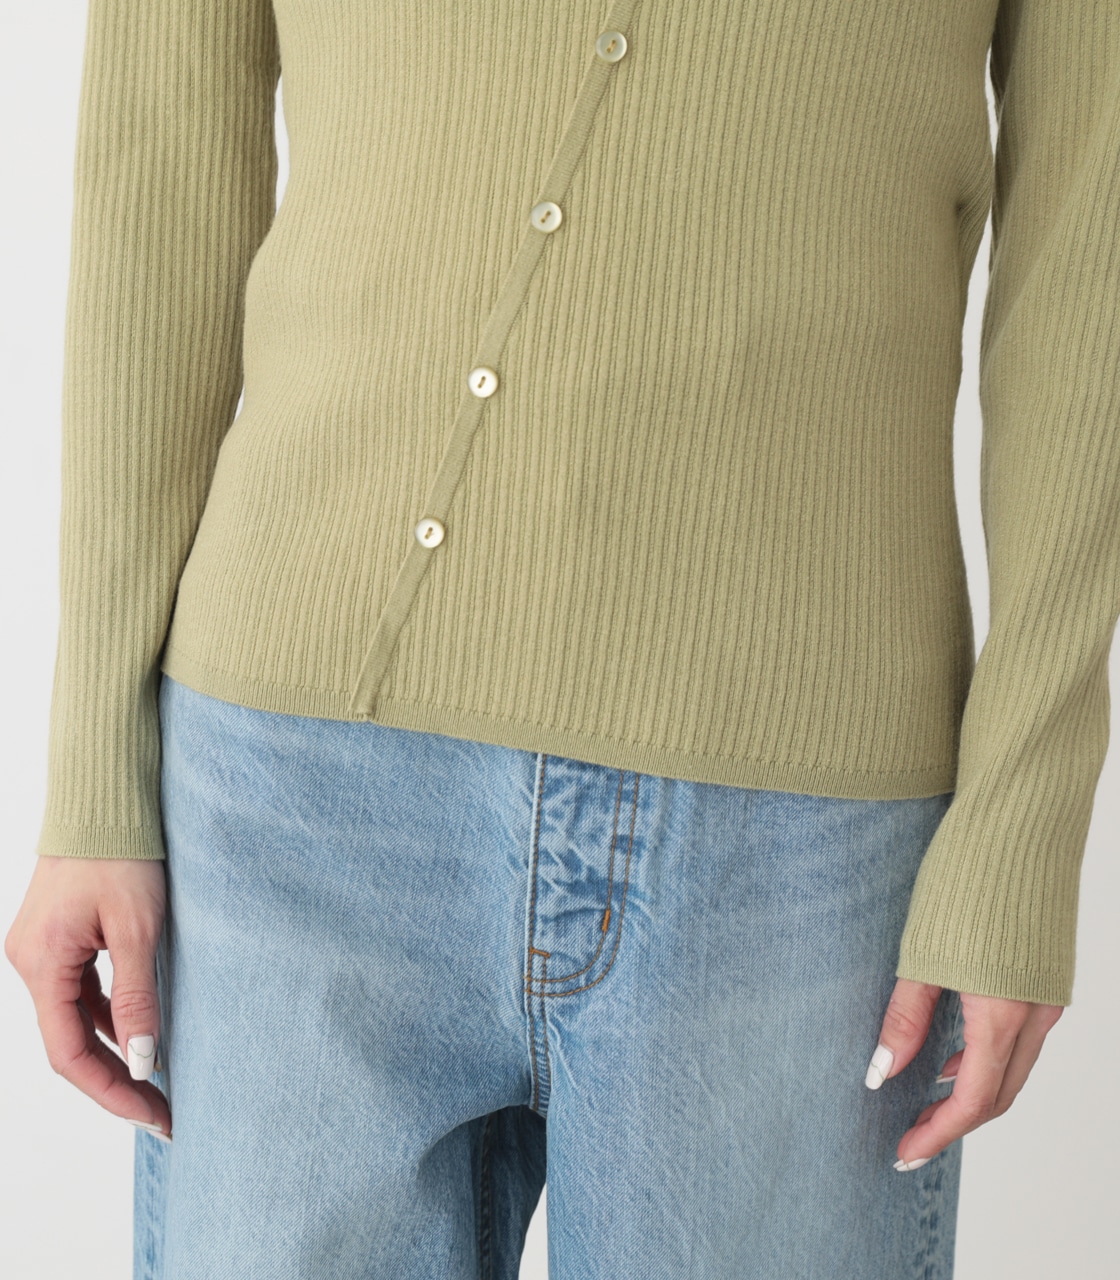 FAKE LAYERED BUTTON KNIT TOPS/フェイクレイヤードボタンニットトップス 詳細画像 LIME 10